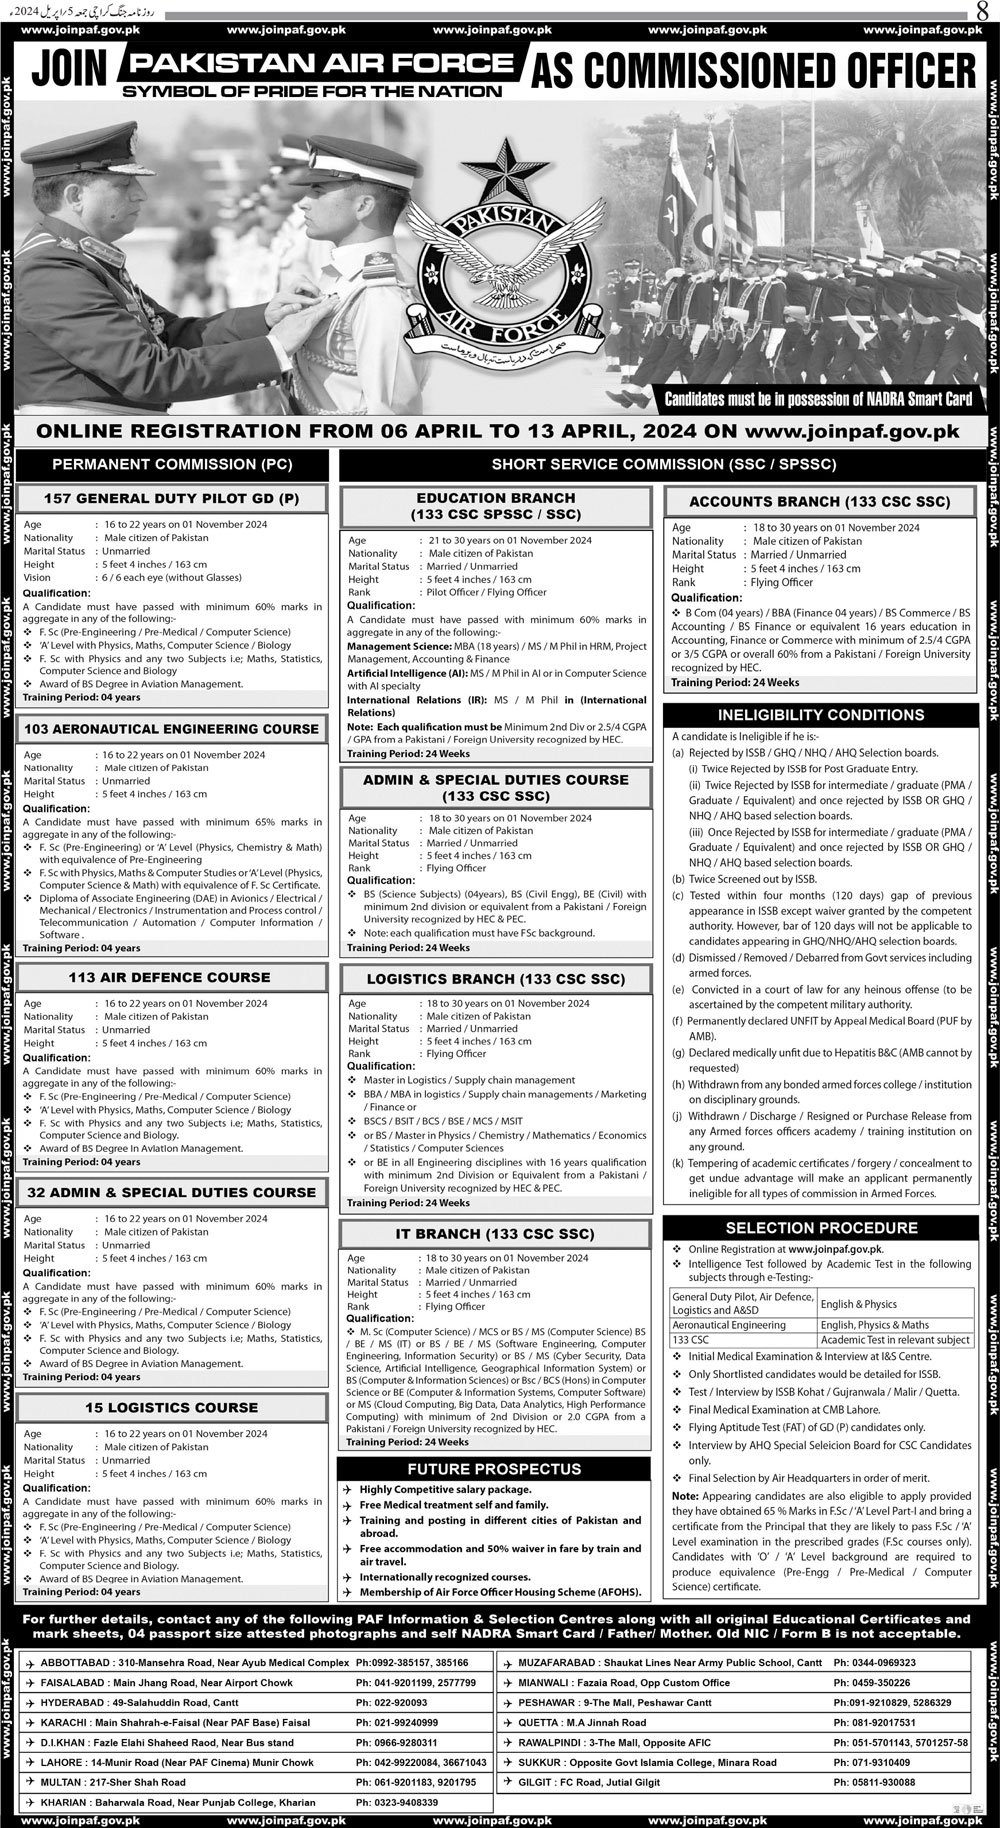 Online Registration to Join Pakistan Air Force (PAF) as Commissioned Officer